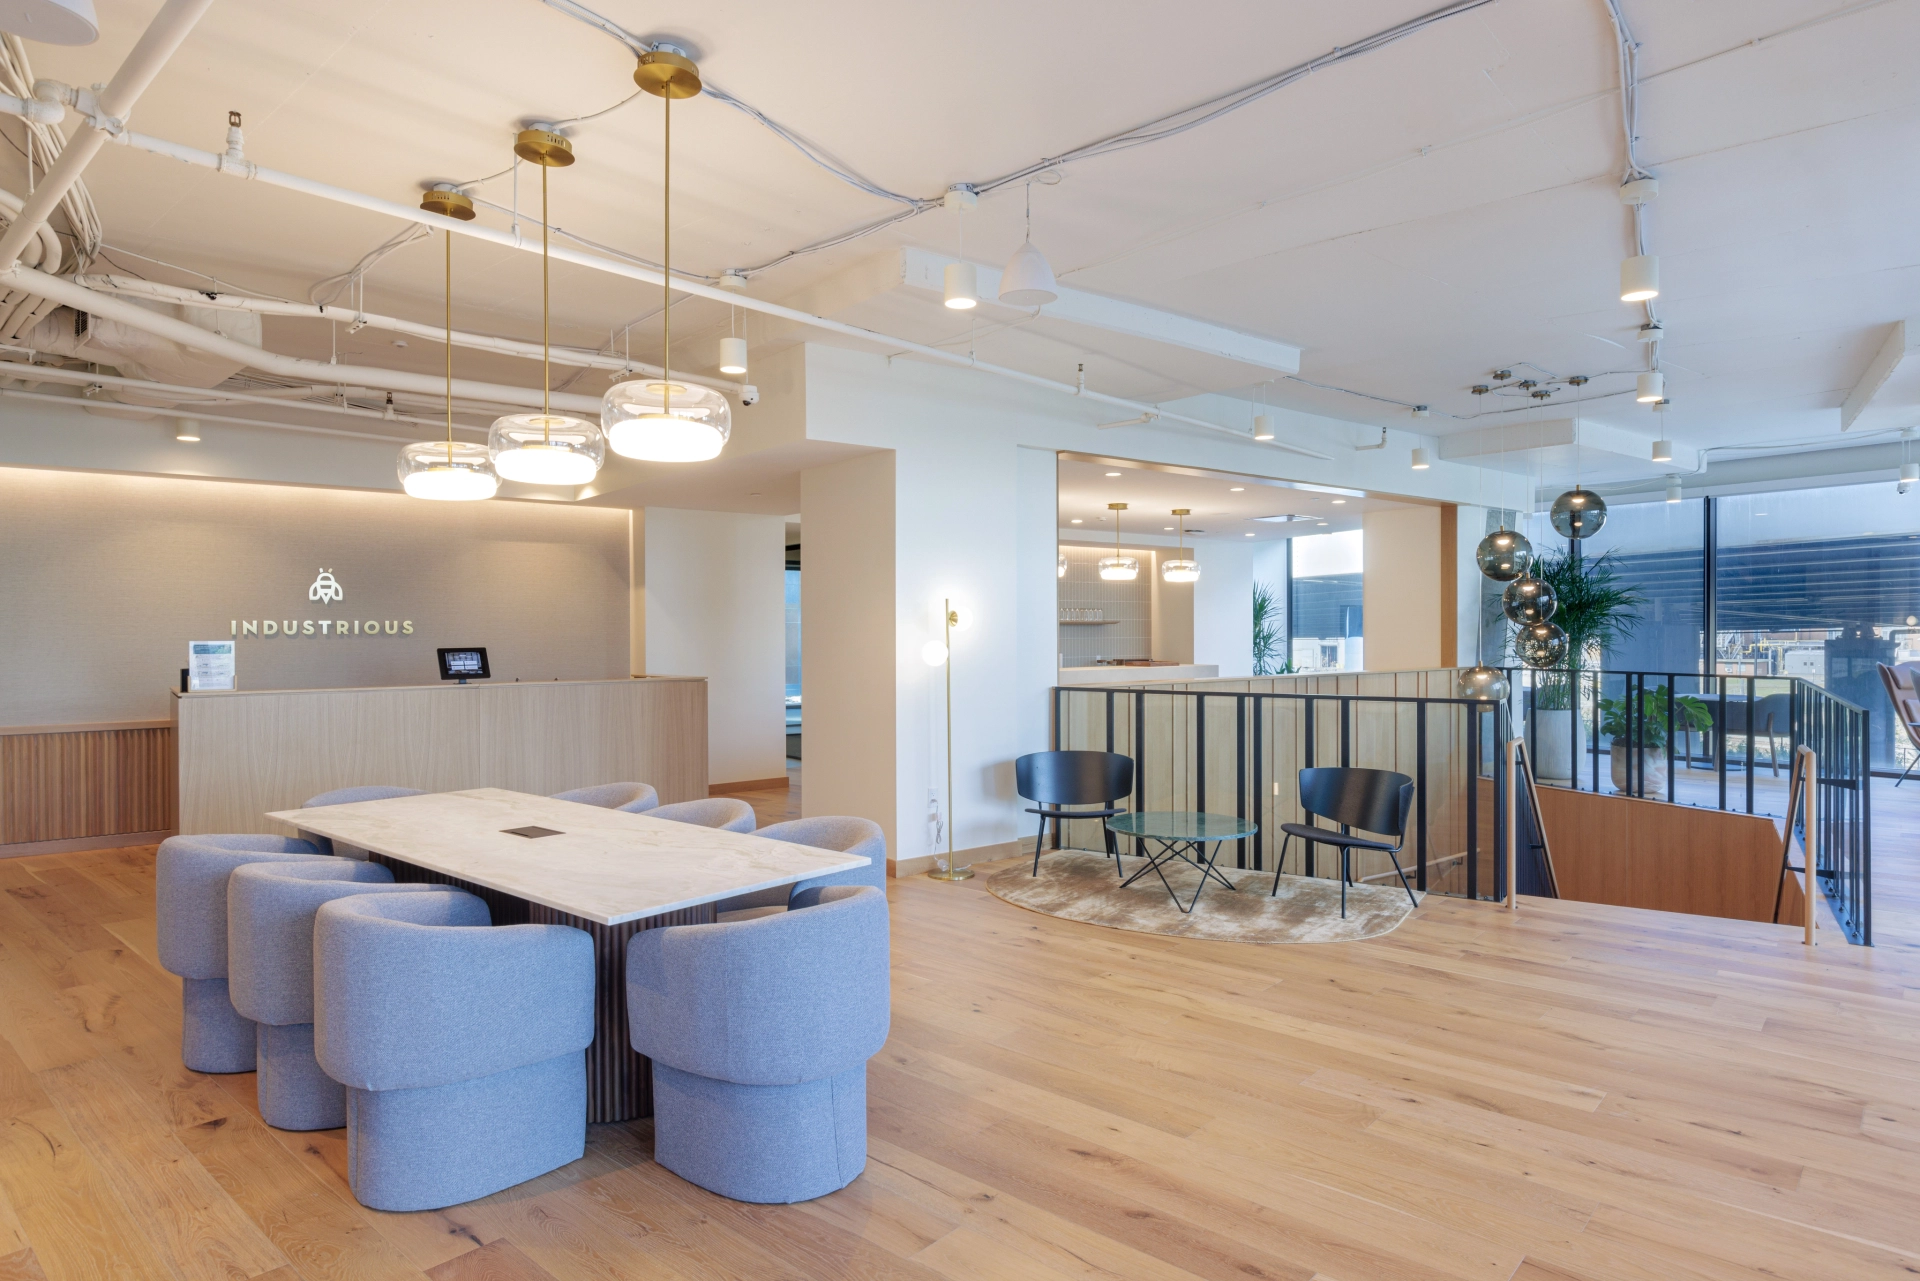 A modern coworking office in Washington DC with wooden floors and blue chairs.